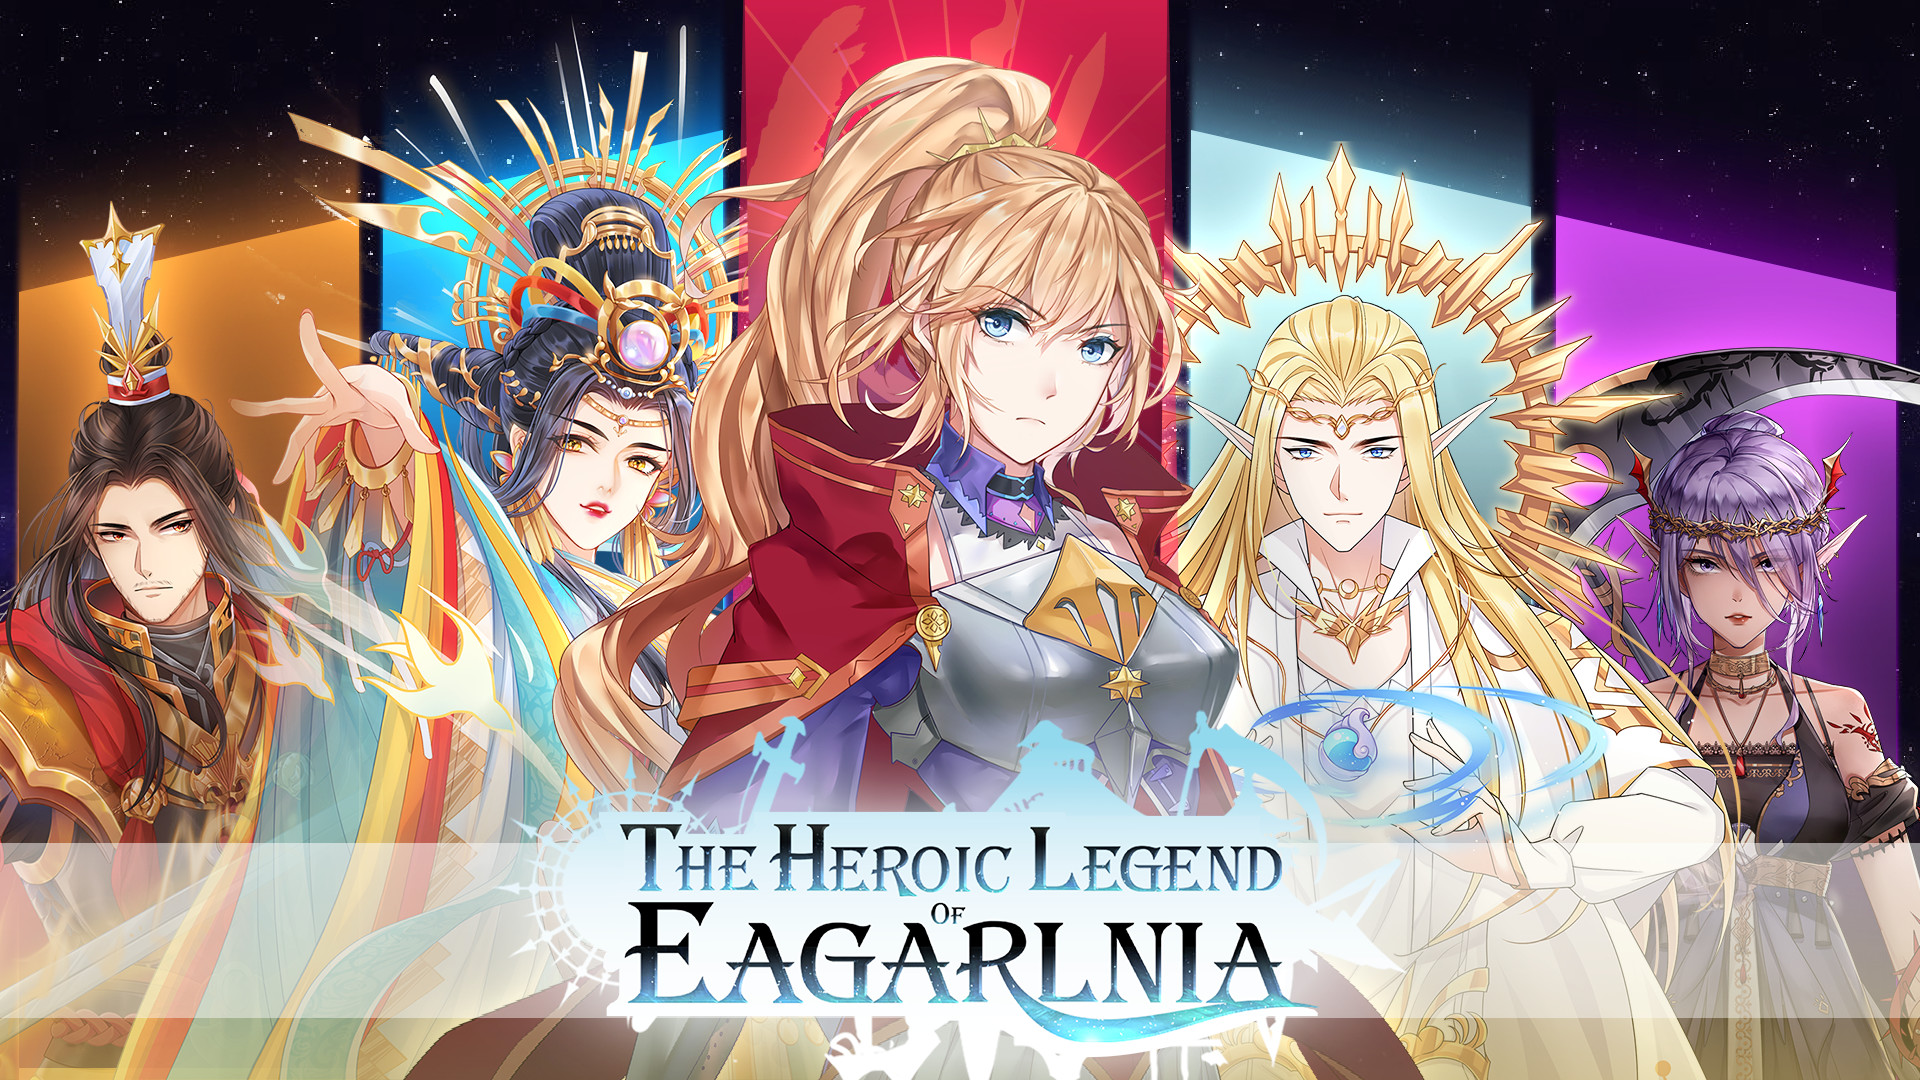 Find the best computers for The Heroic Legend of Eagarlnia